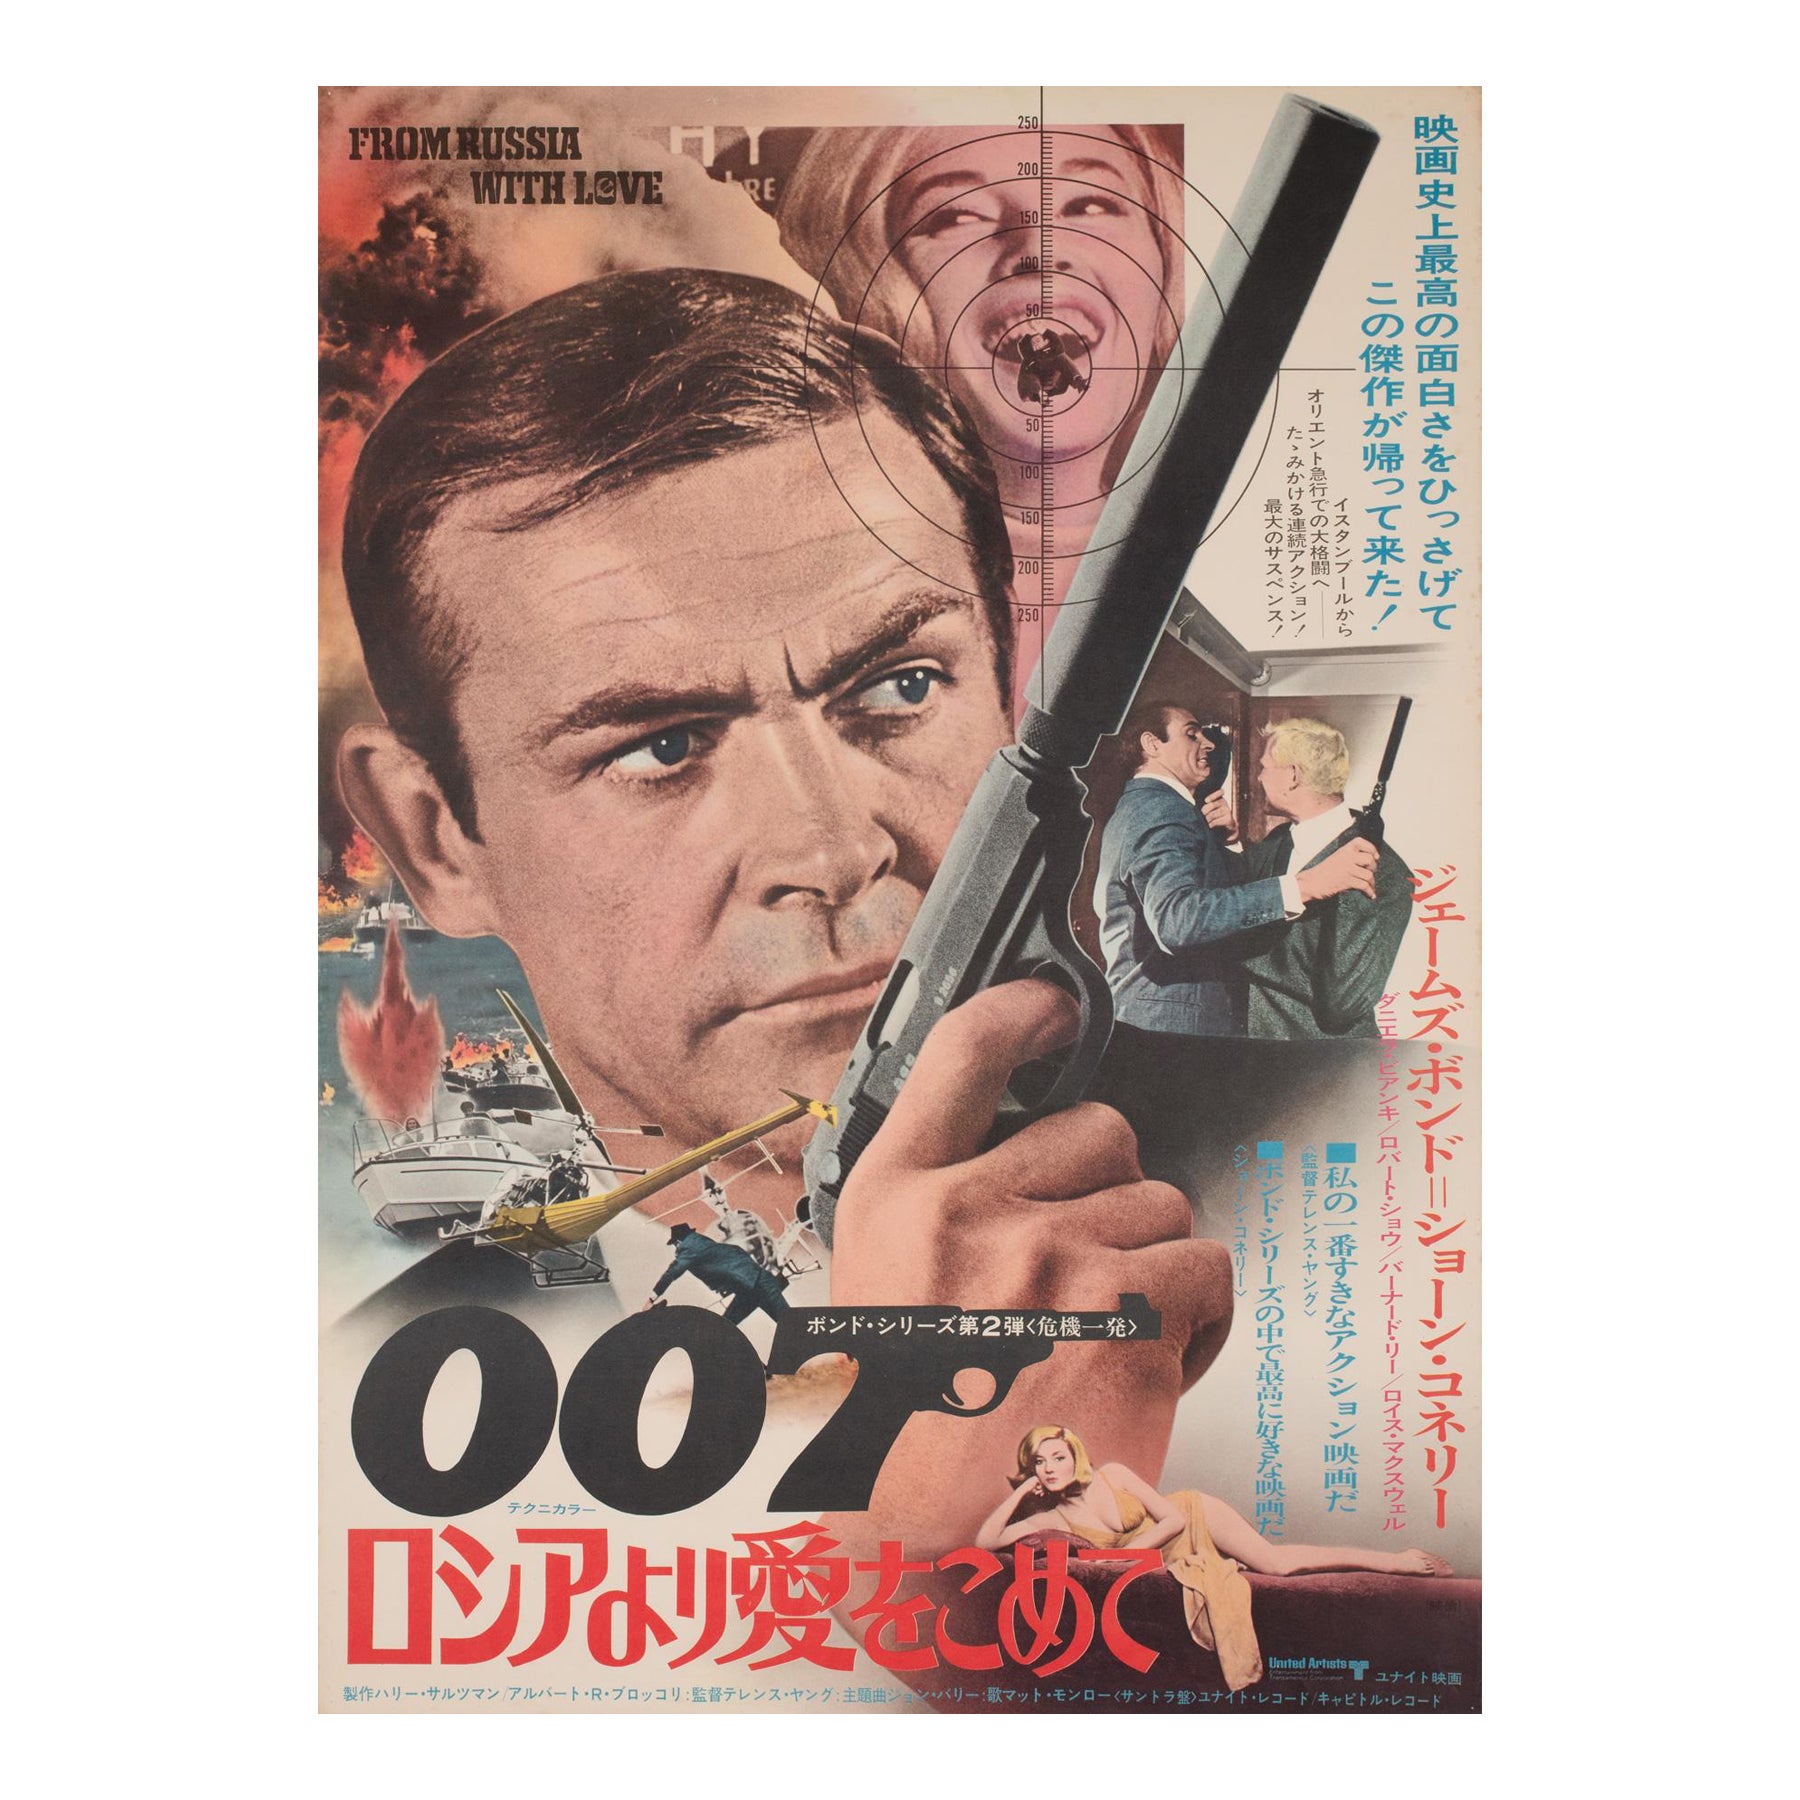 From Russia With Love R1972 Japanese B2 Film Poster For Sale